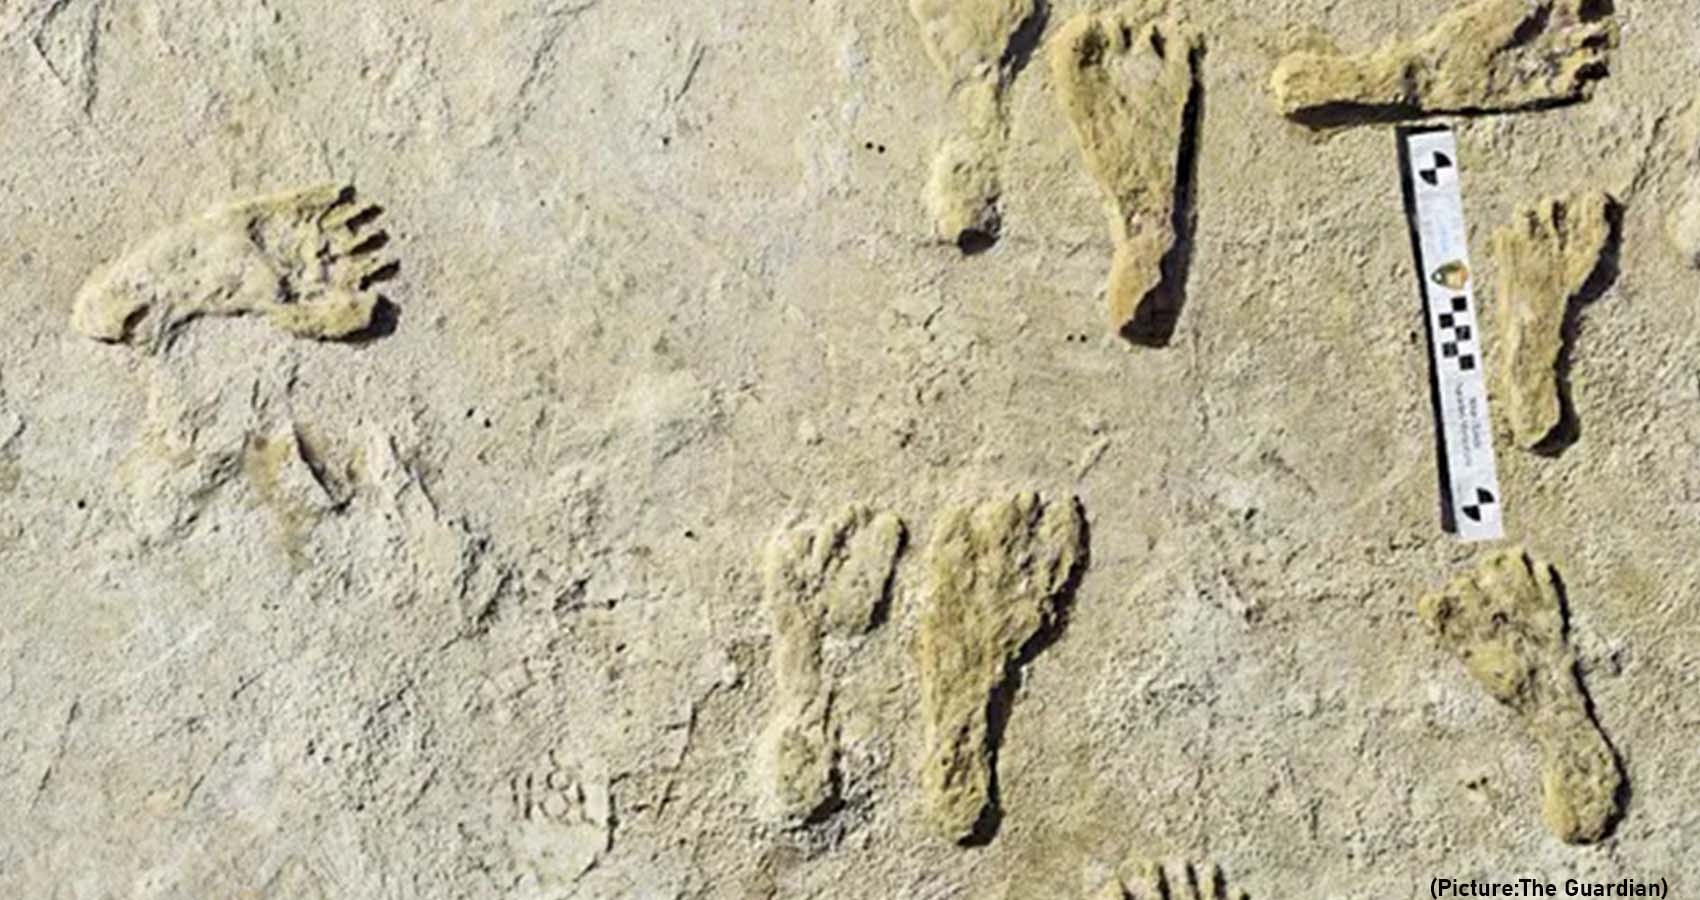 Human Footprints Thought To Be Oldest In North America Discovered